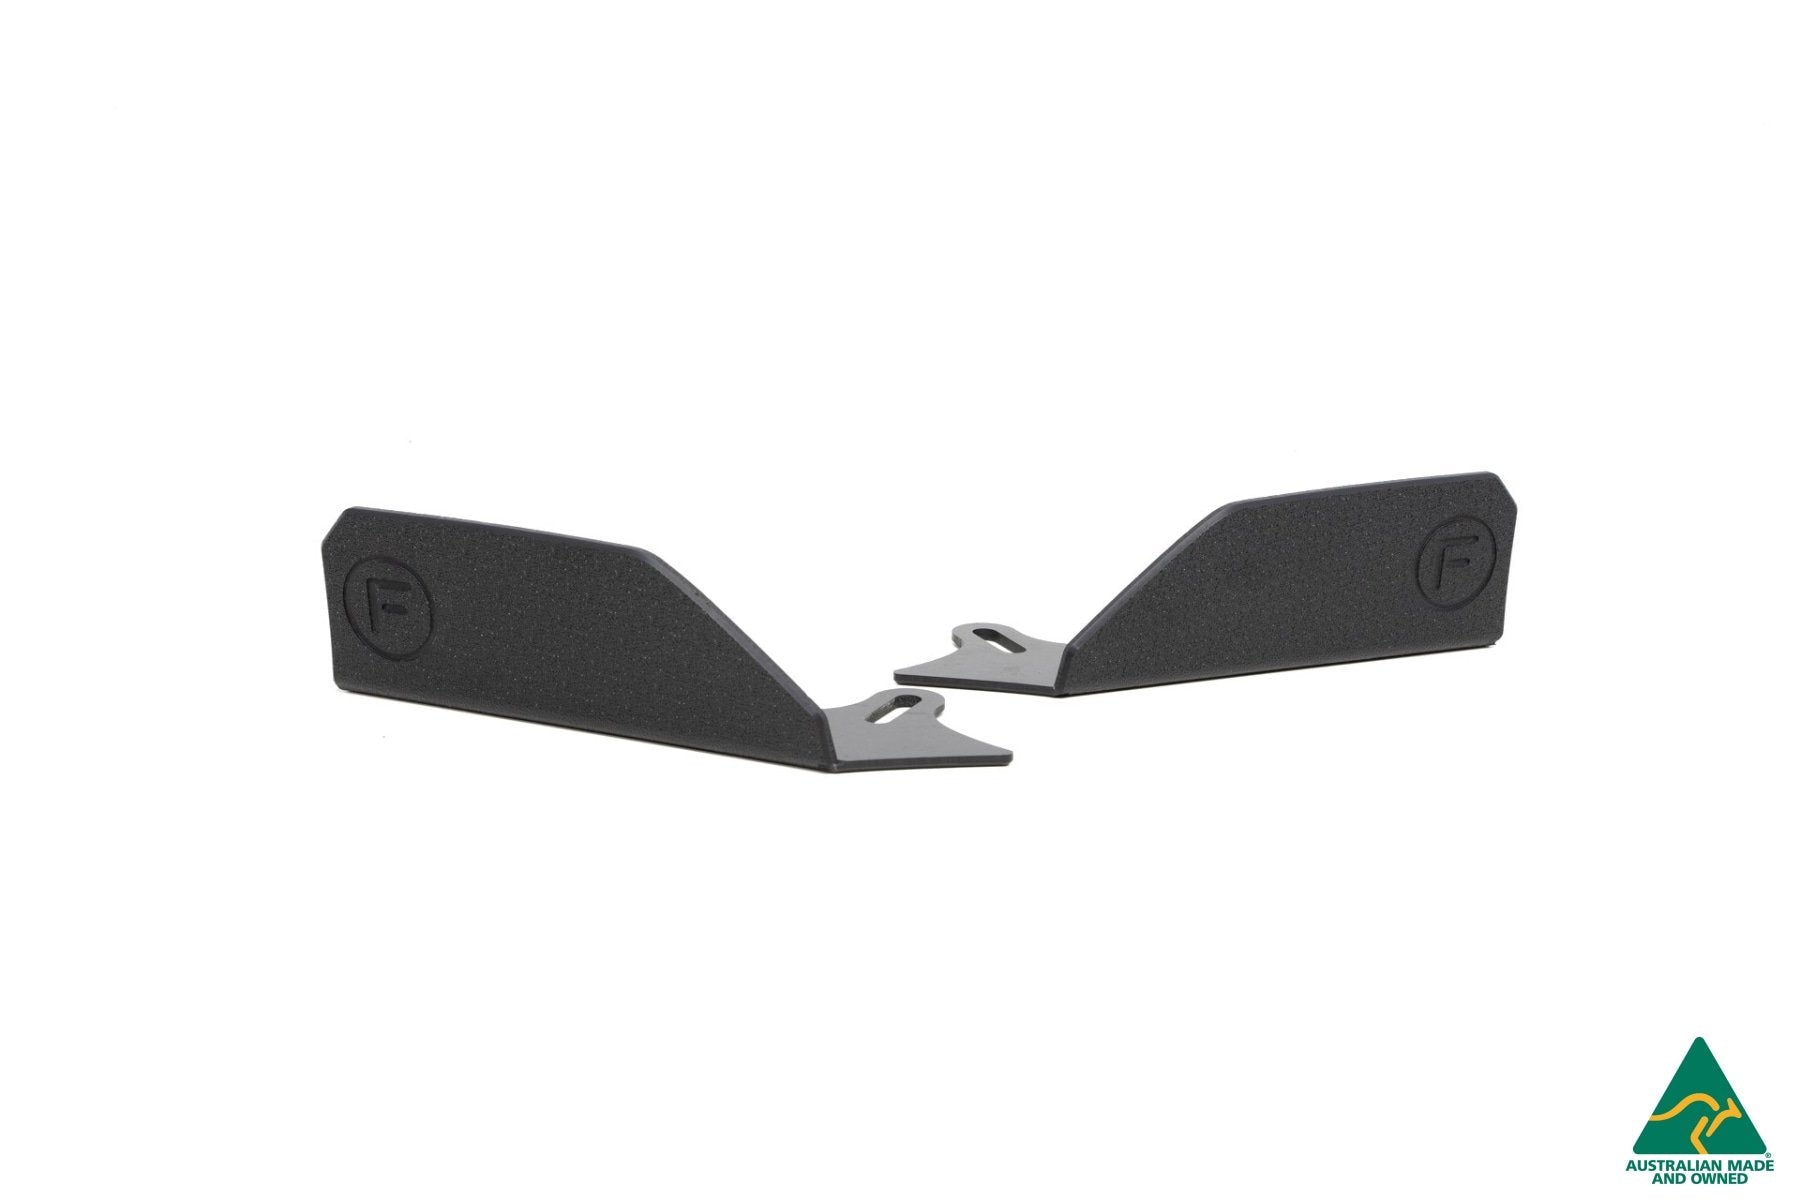 AW Polo GTI Side Skirt Splitter Winglets (Pair) - MODE Auto Concepts